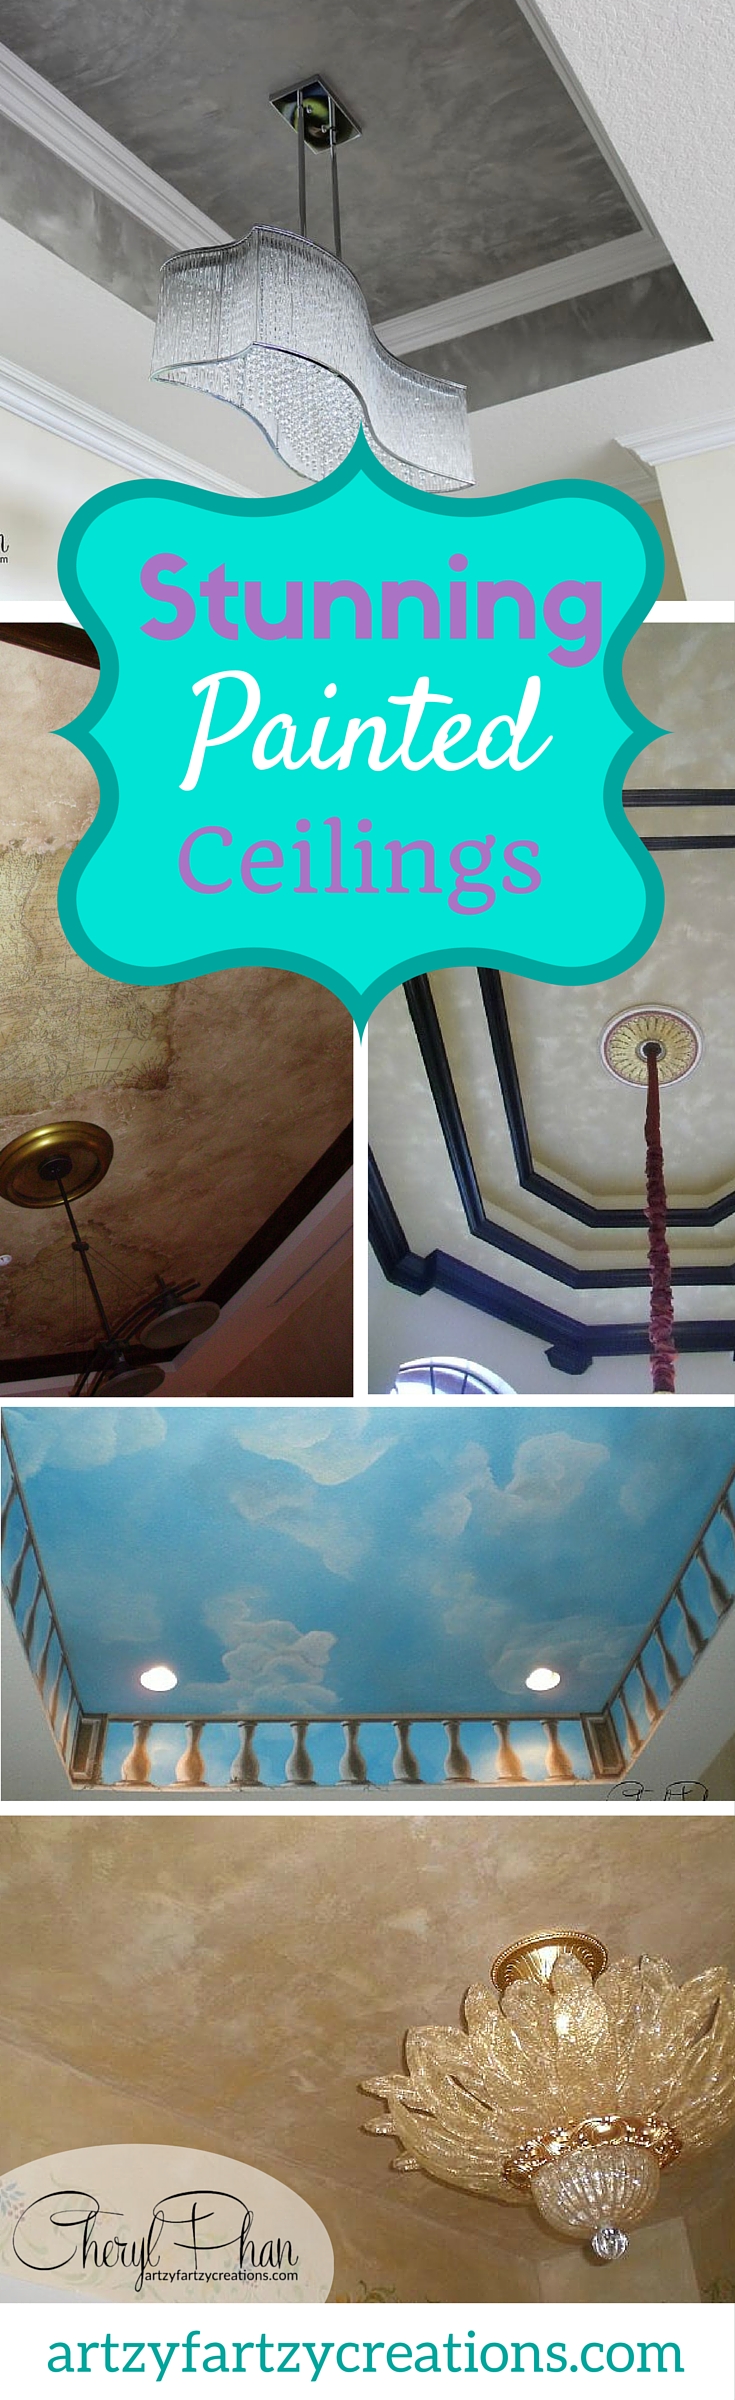 Pin: Stunning Painted Ceilings